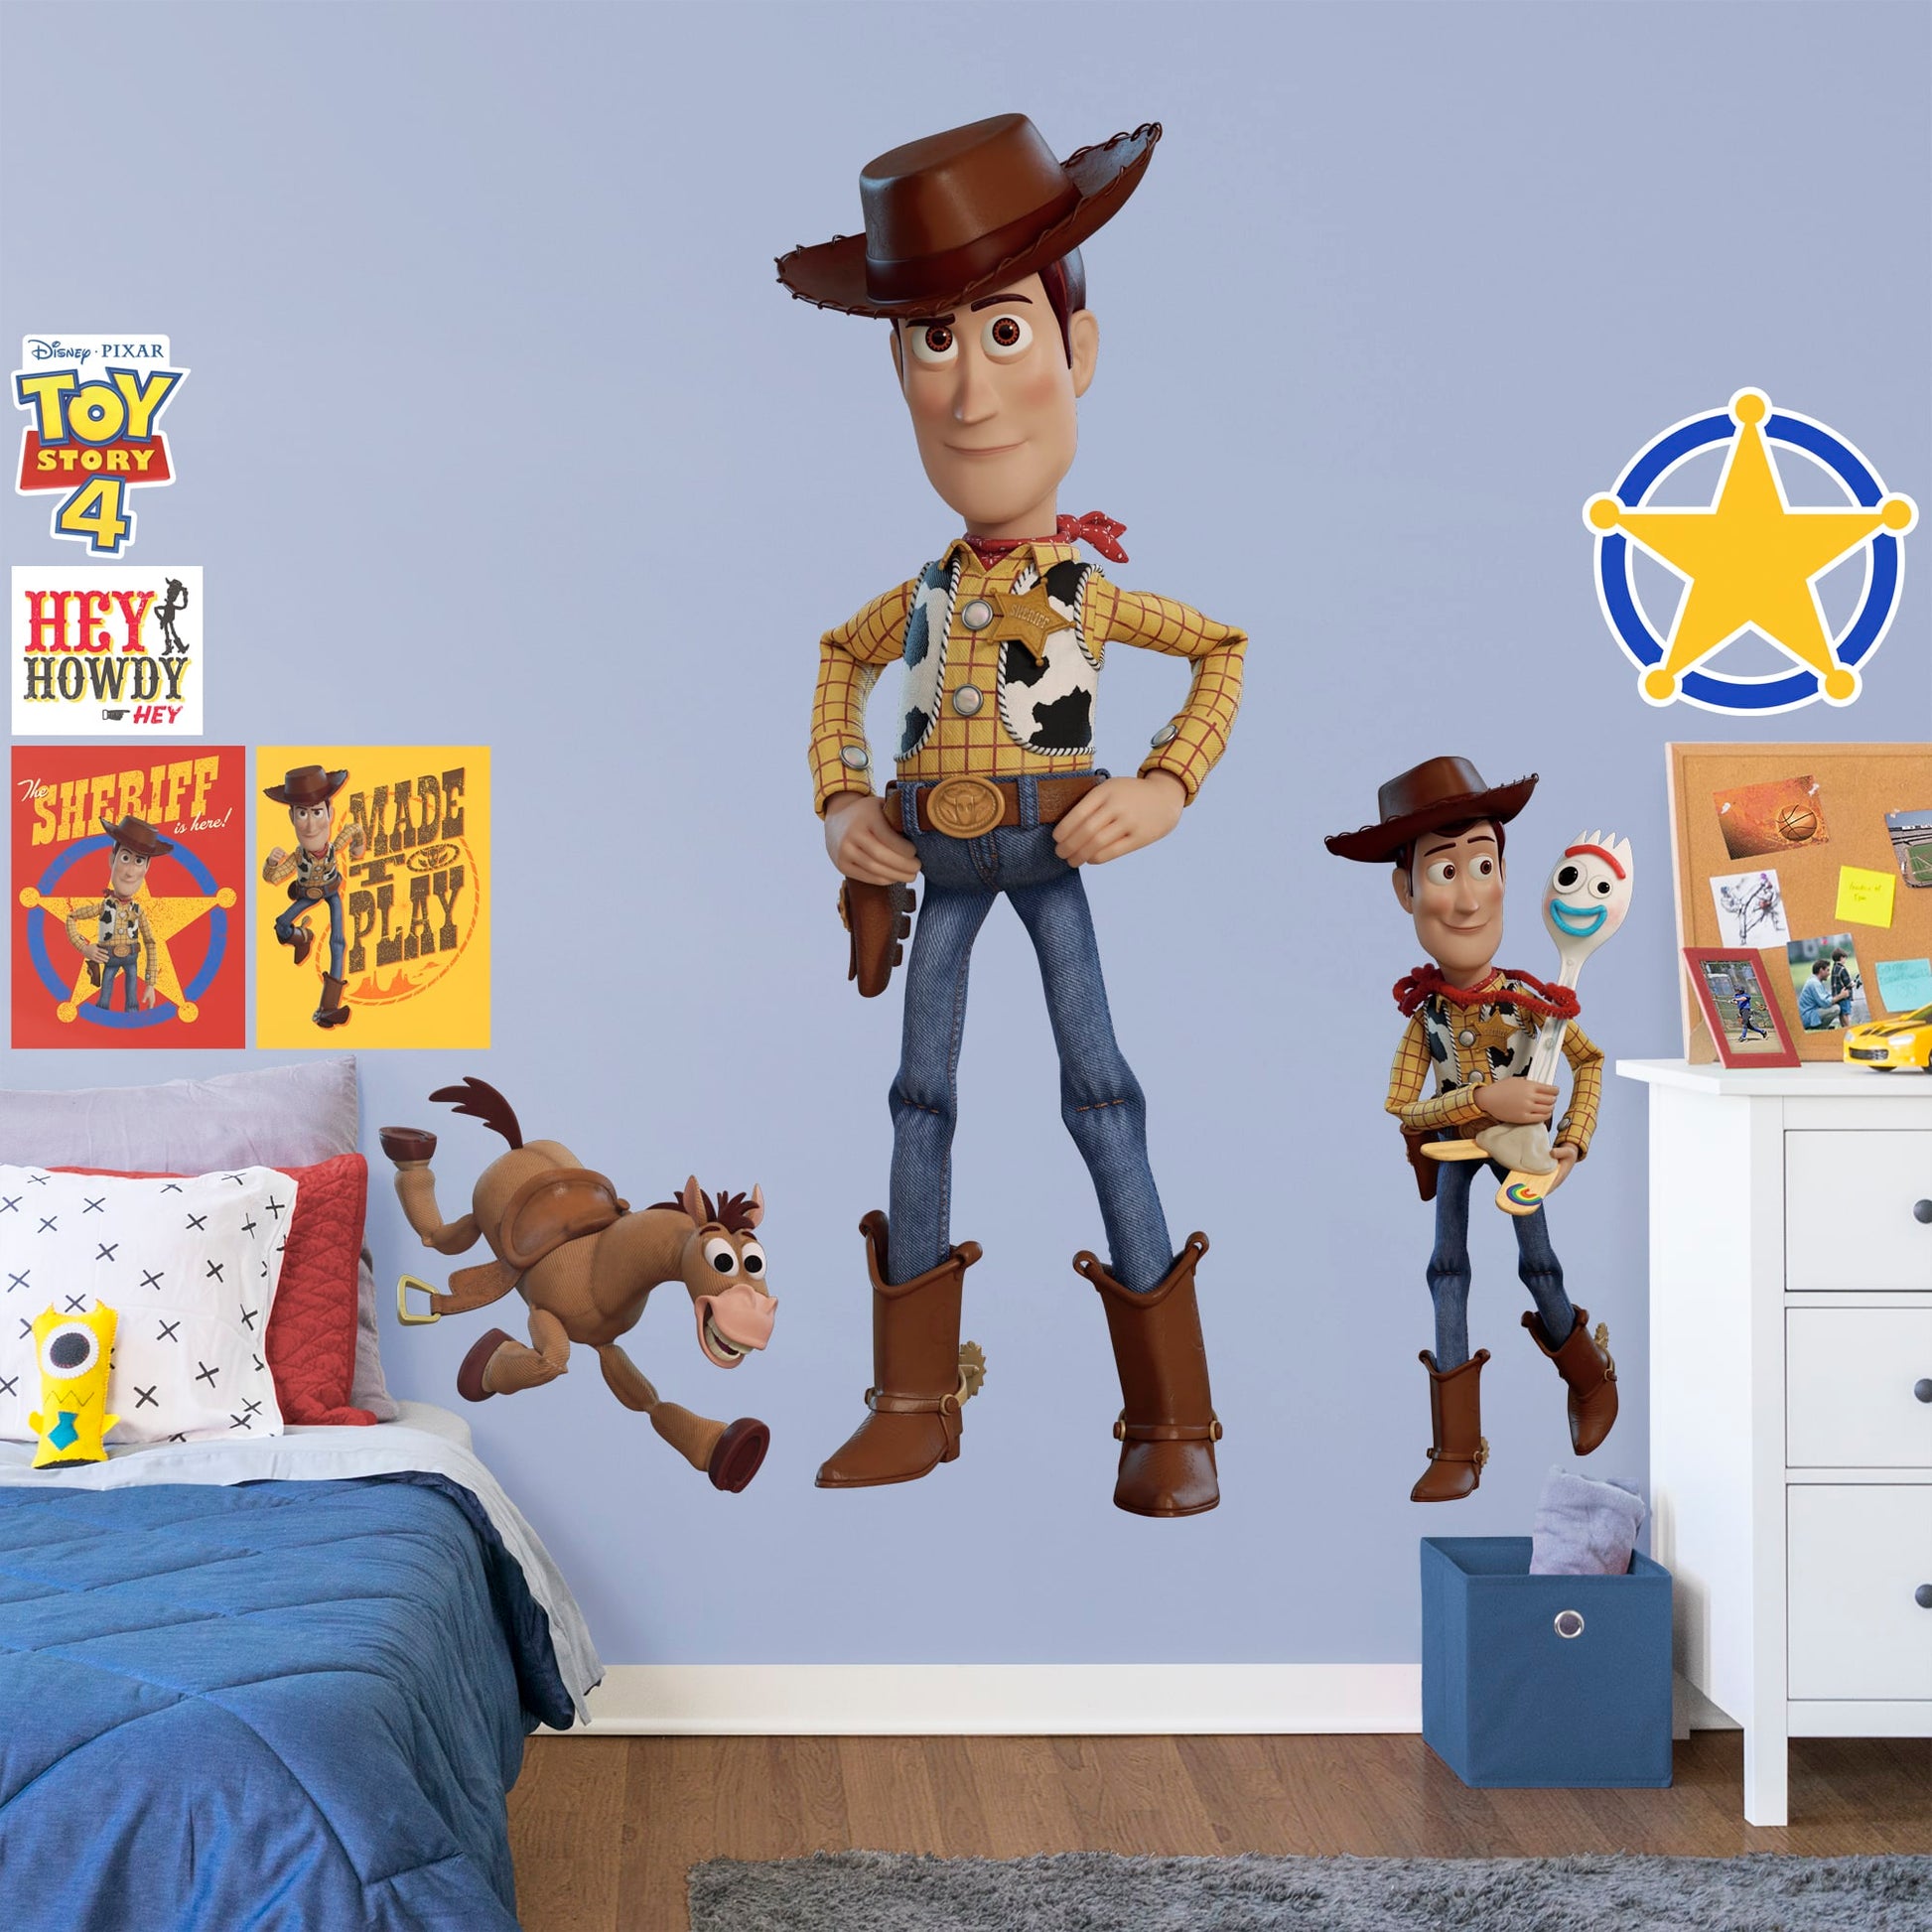 Fathead Toy Story 4: Woody - Giant Officially Licensed Disney/Pixar Removable Wall Decal